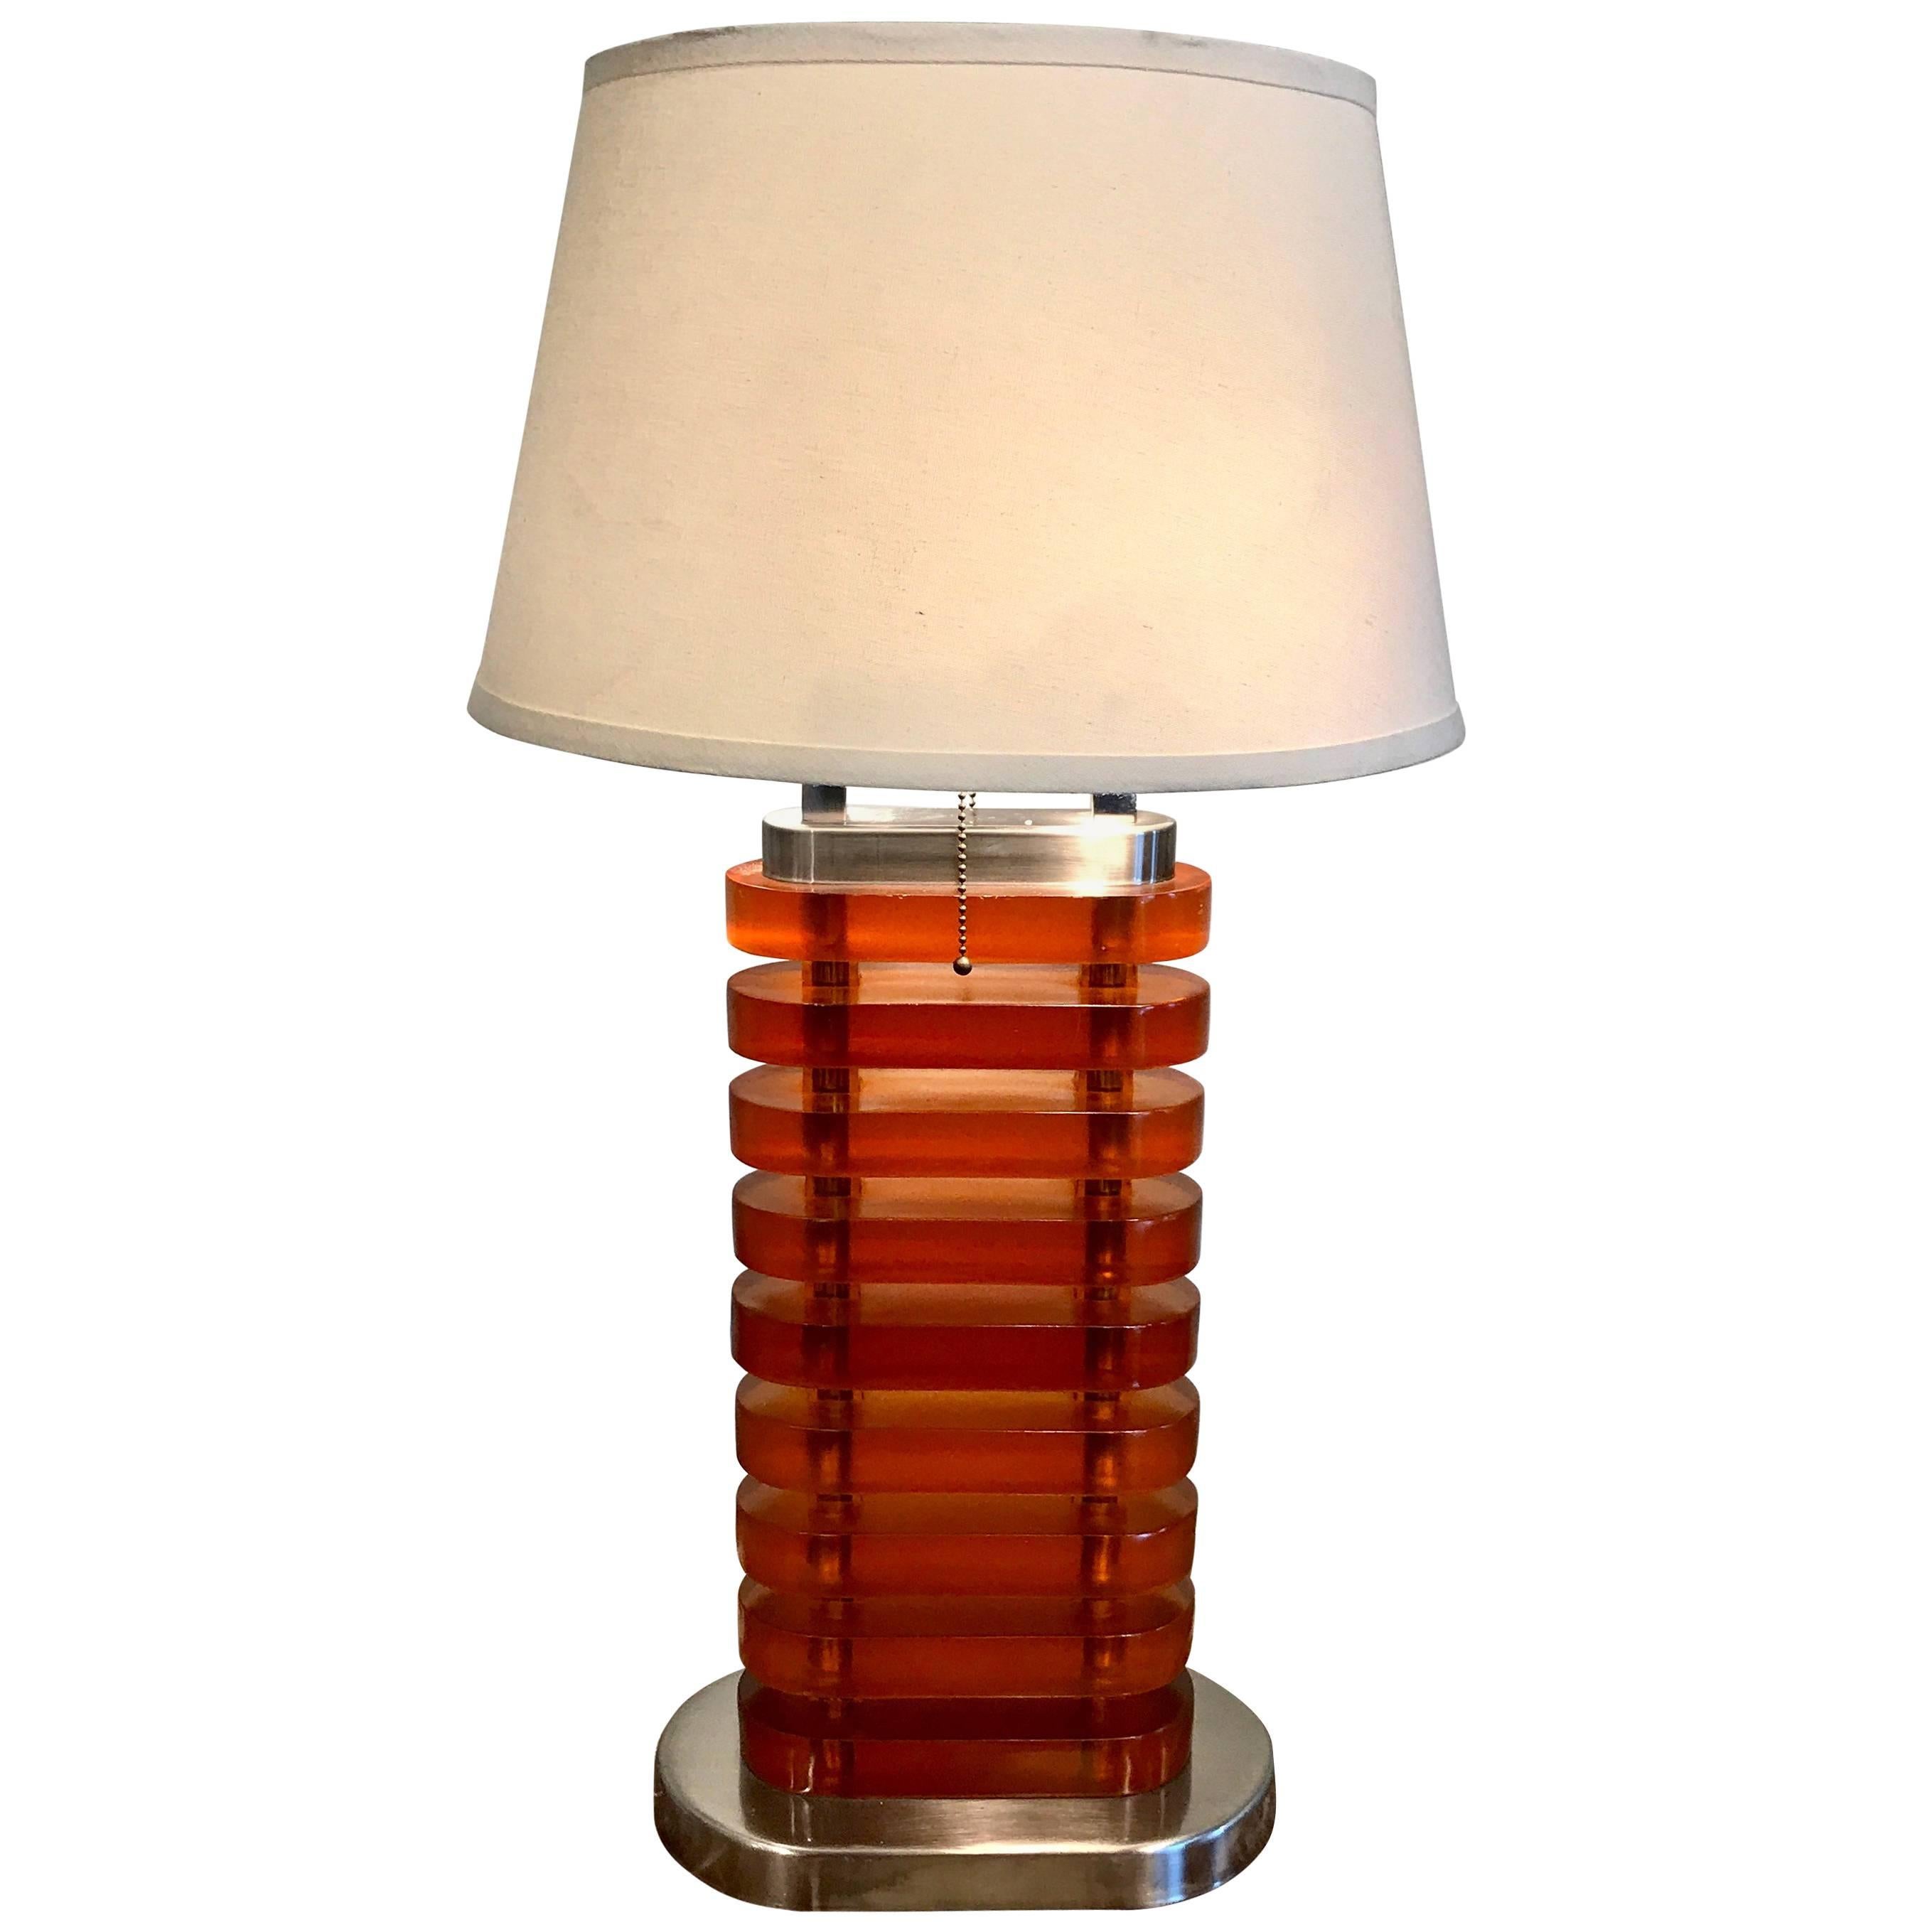 Large Midcentury Stacked Amber Lucite Lamp